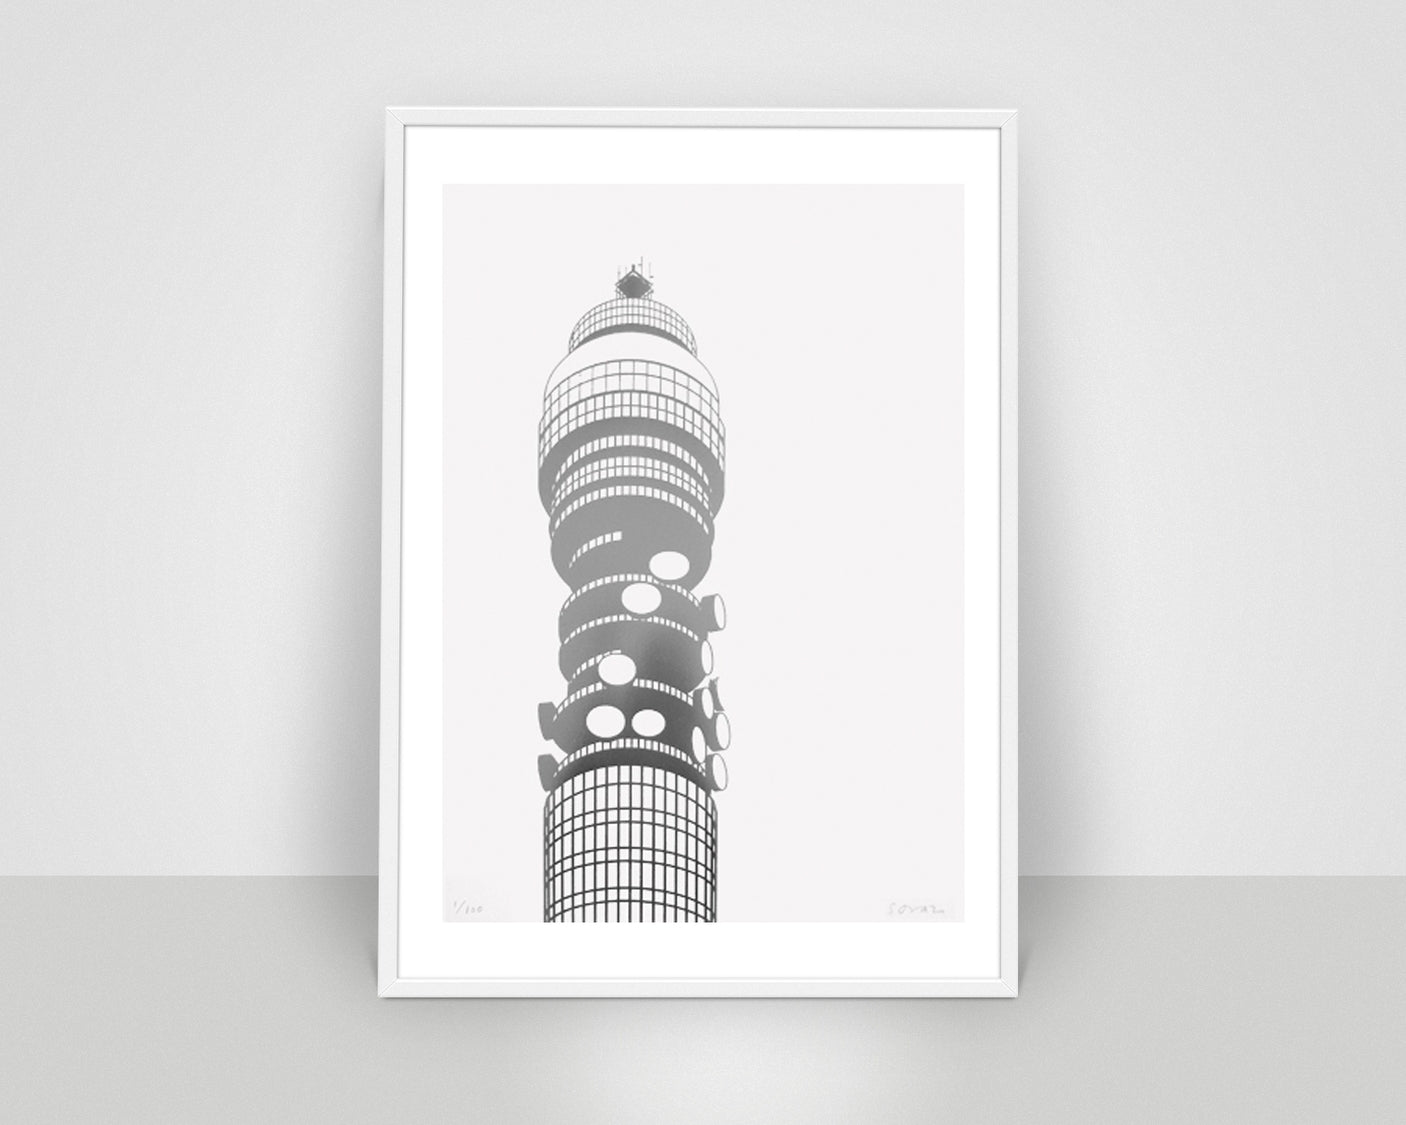 BT Tower IV Limited Edition Print, 2015